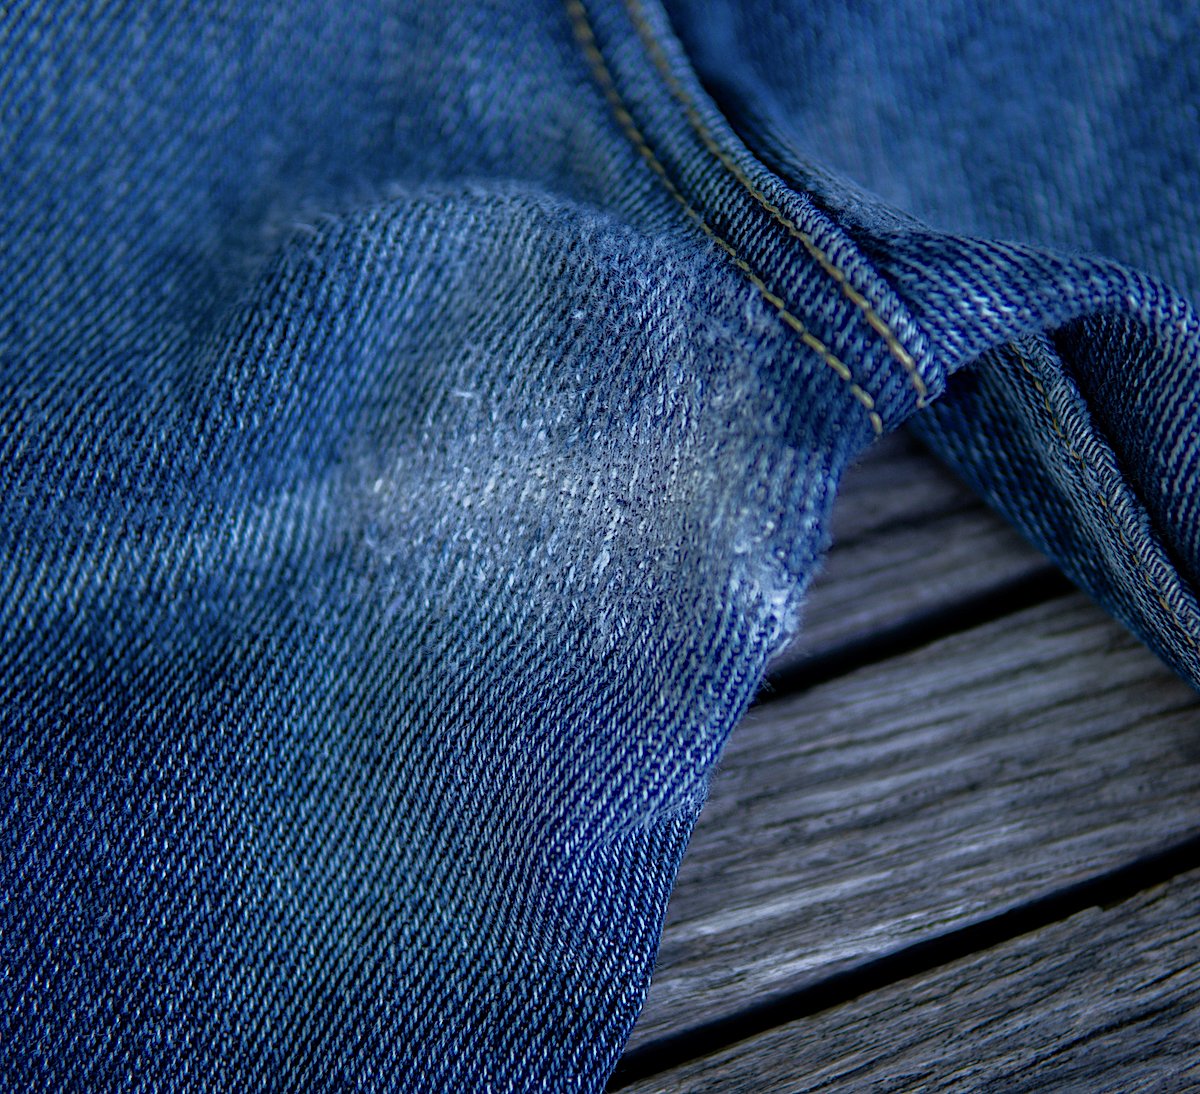 At interagere Gendanne fred How jeans can be repaired (and when they can't) – Permanent Style